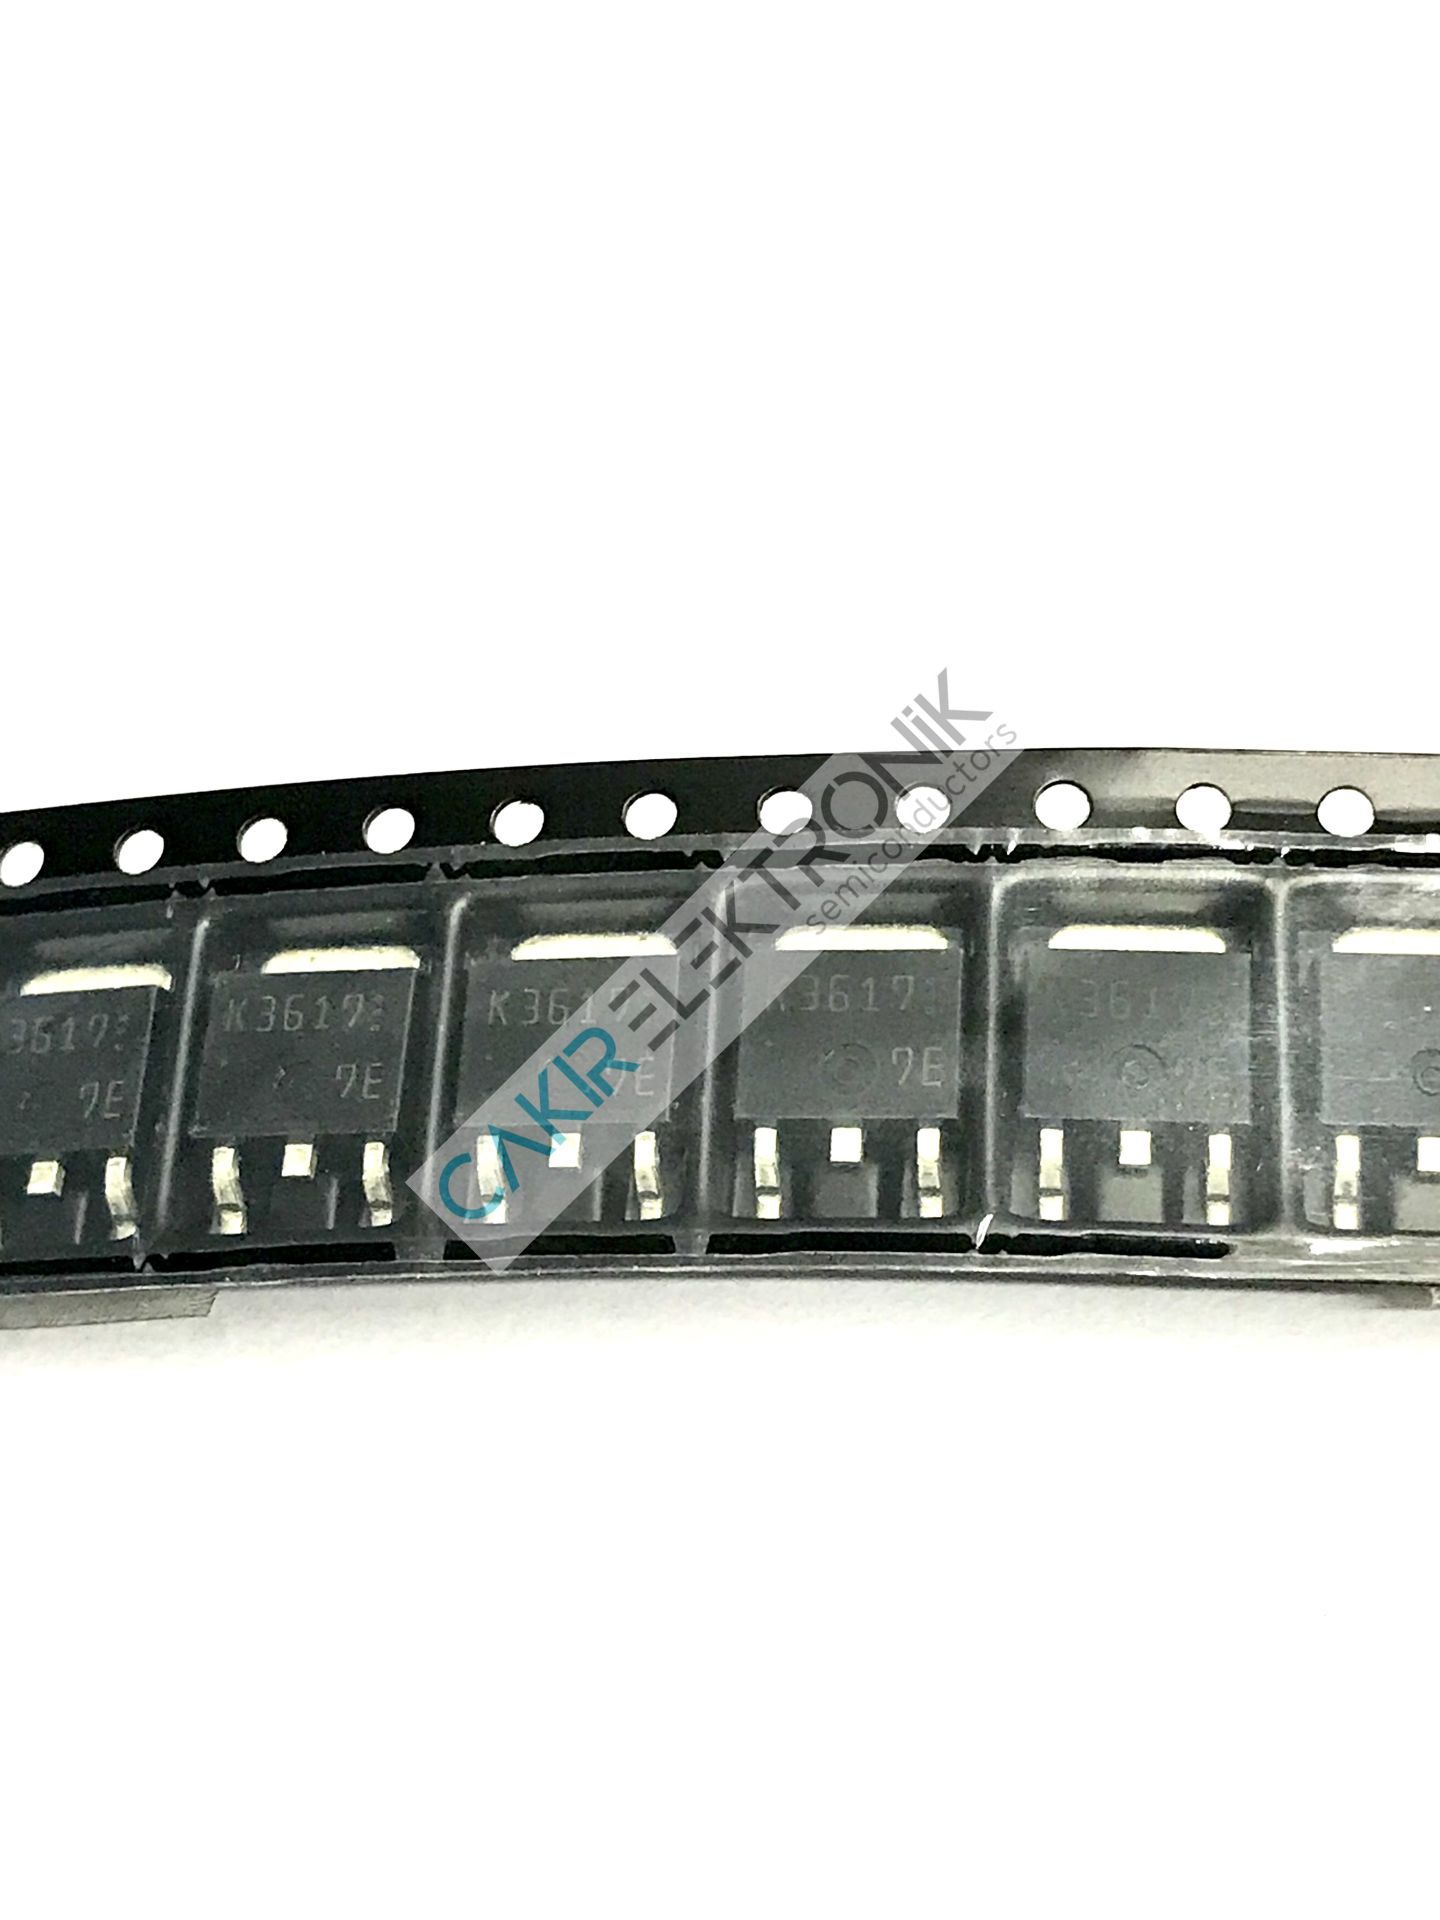 2SK3617 - K3617 - TO-252 - N KANAL 100V. 6A. MOSFET